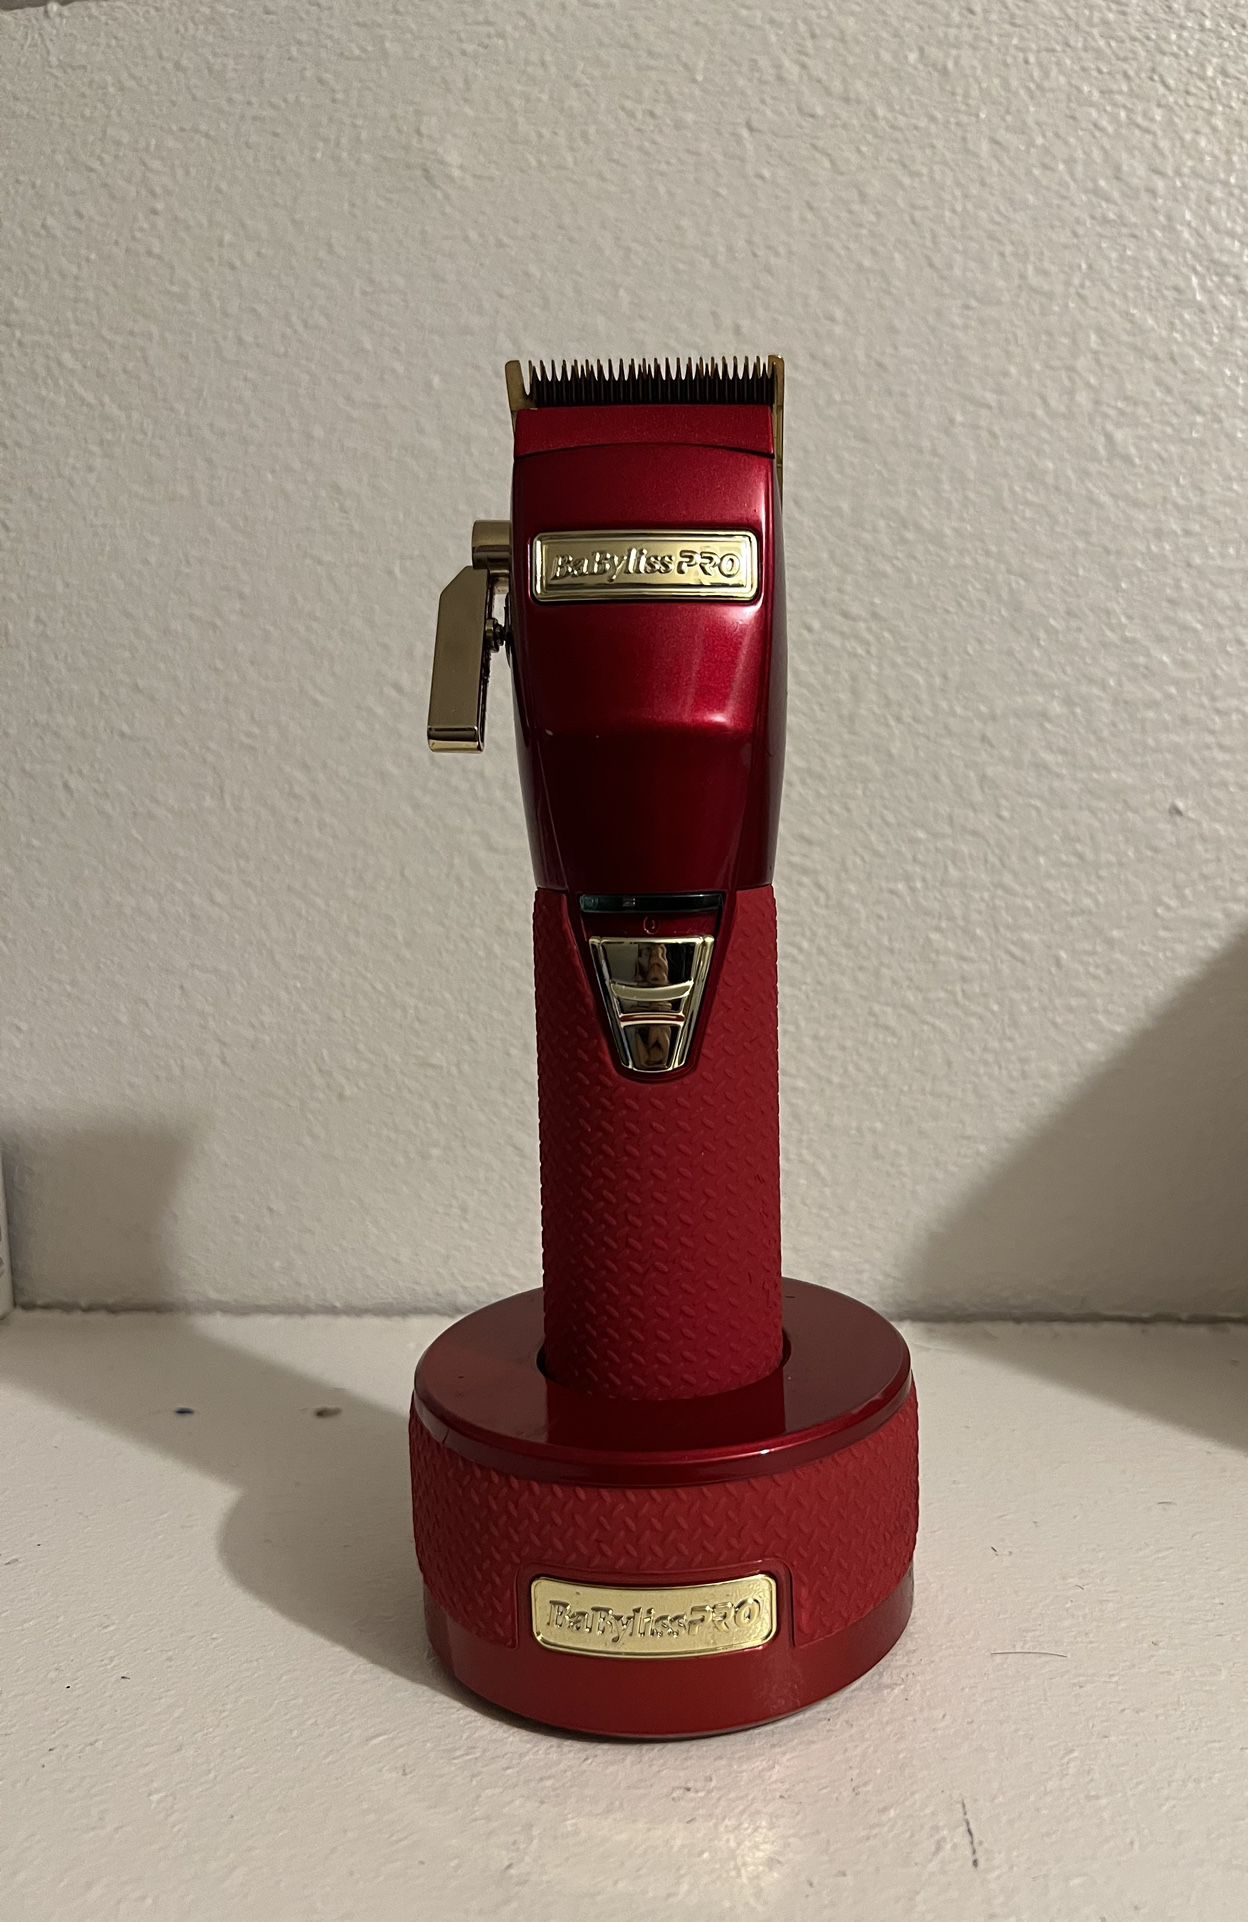 Babyliss clippers 